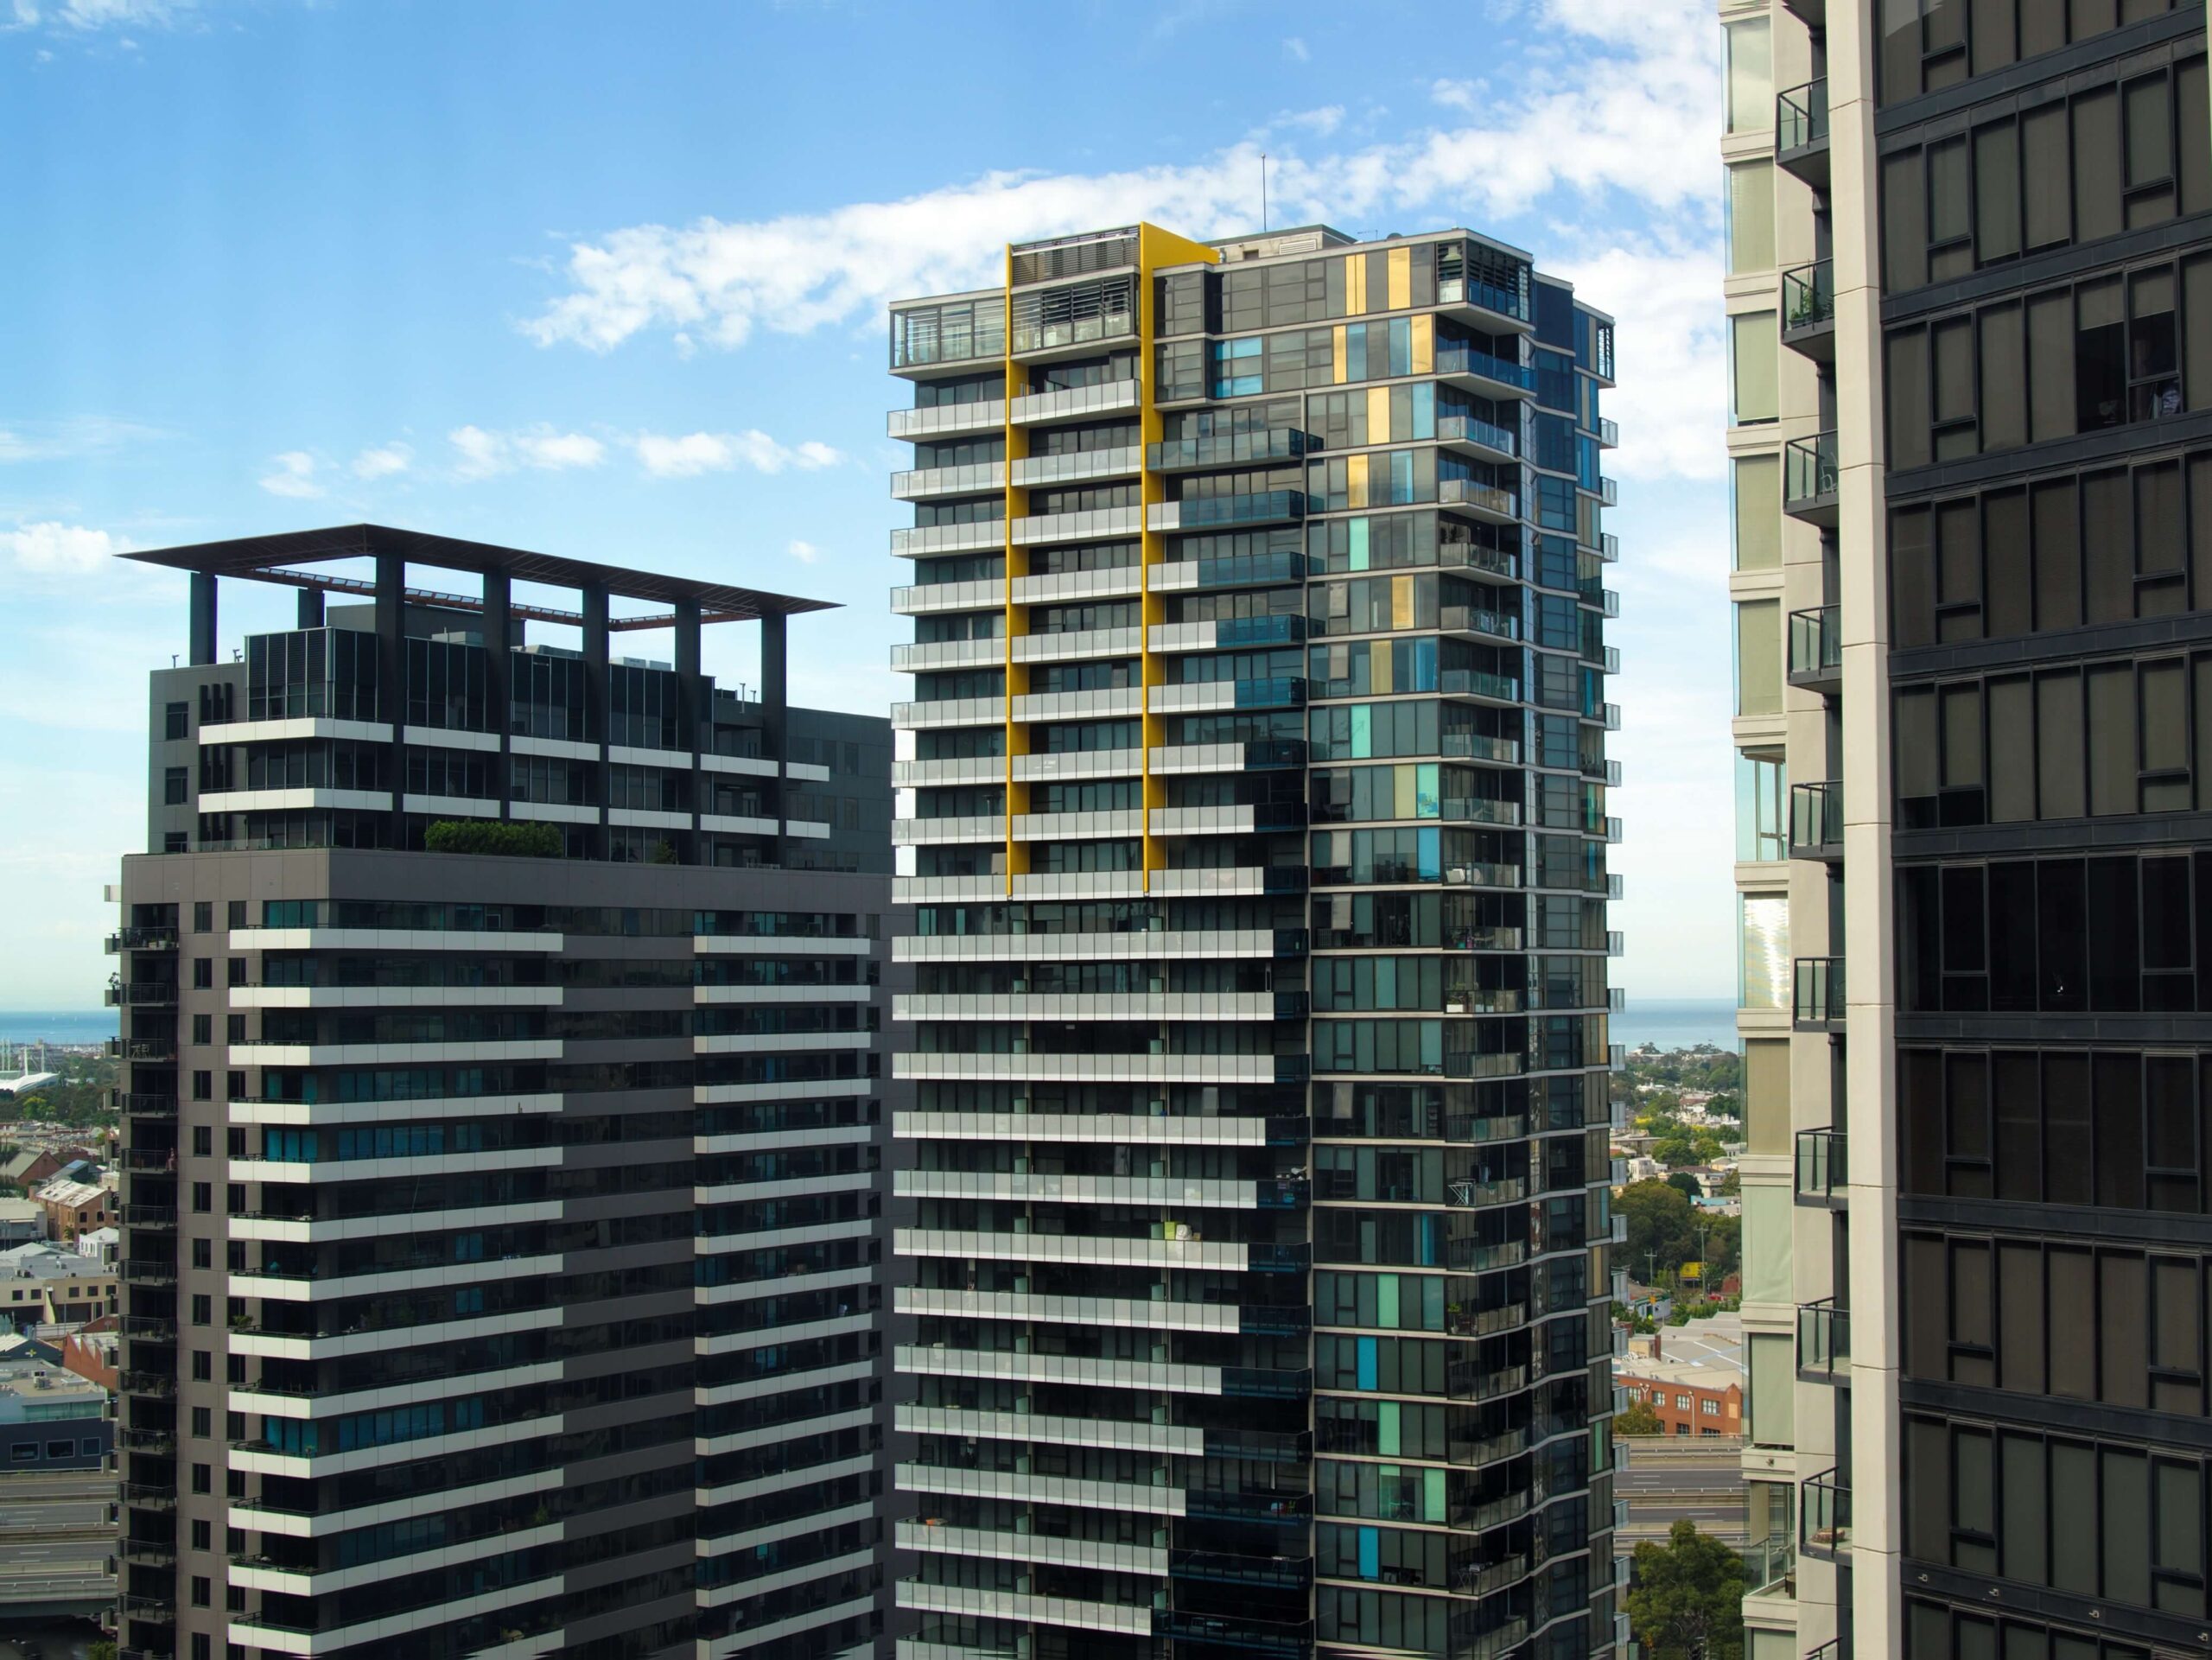 Two high rise multi-family buildings in a city. These buildings are part of the answer to the Australian housing crisis